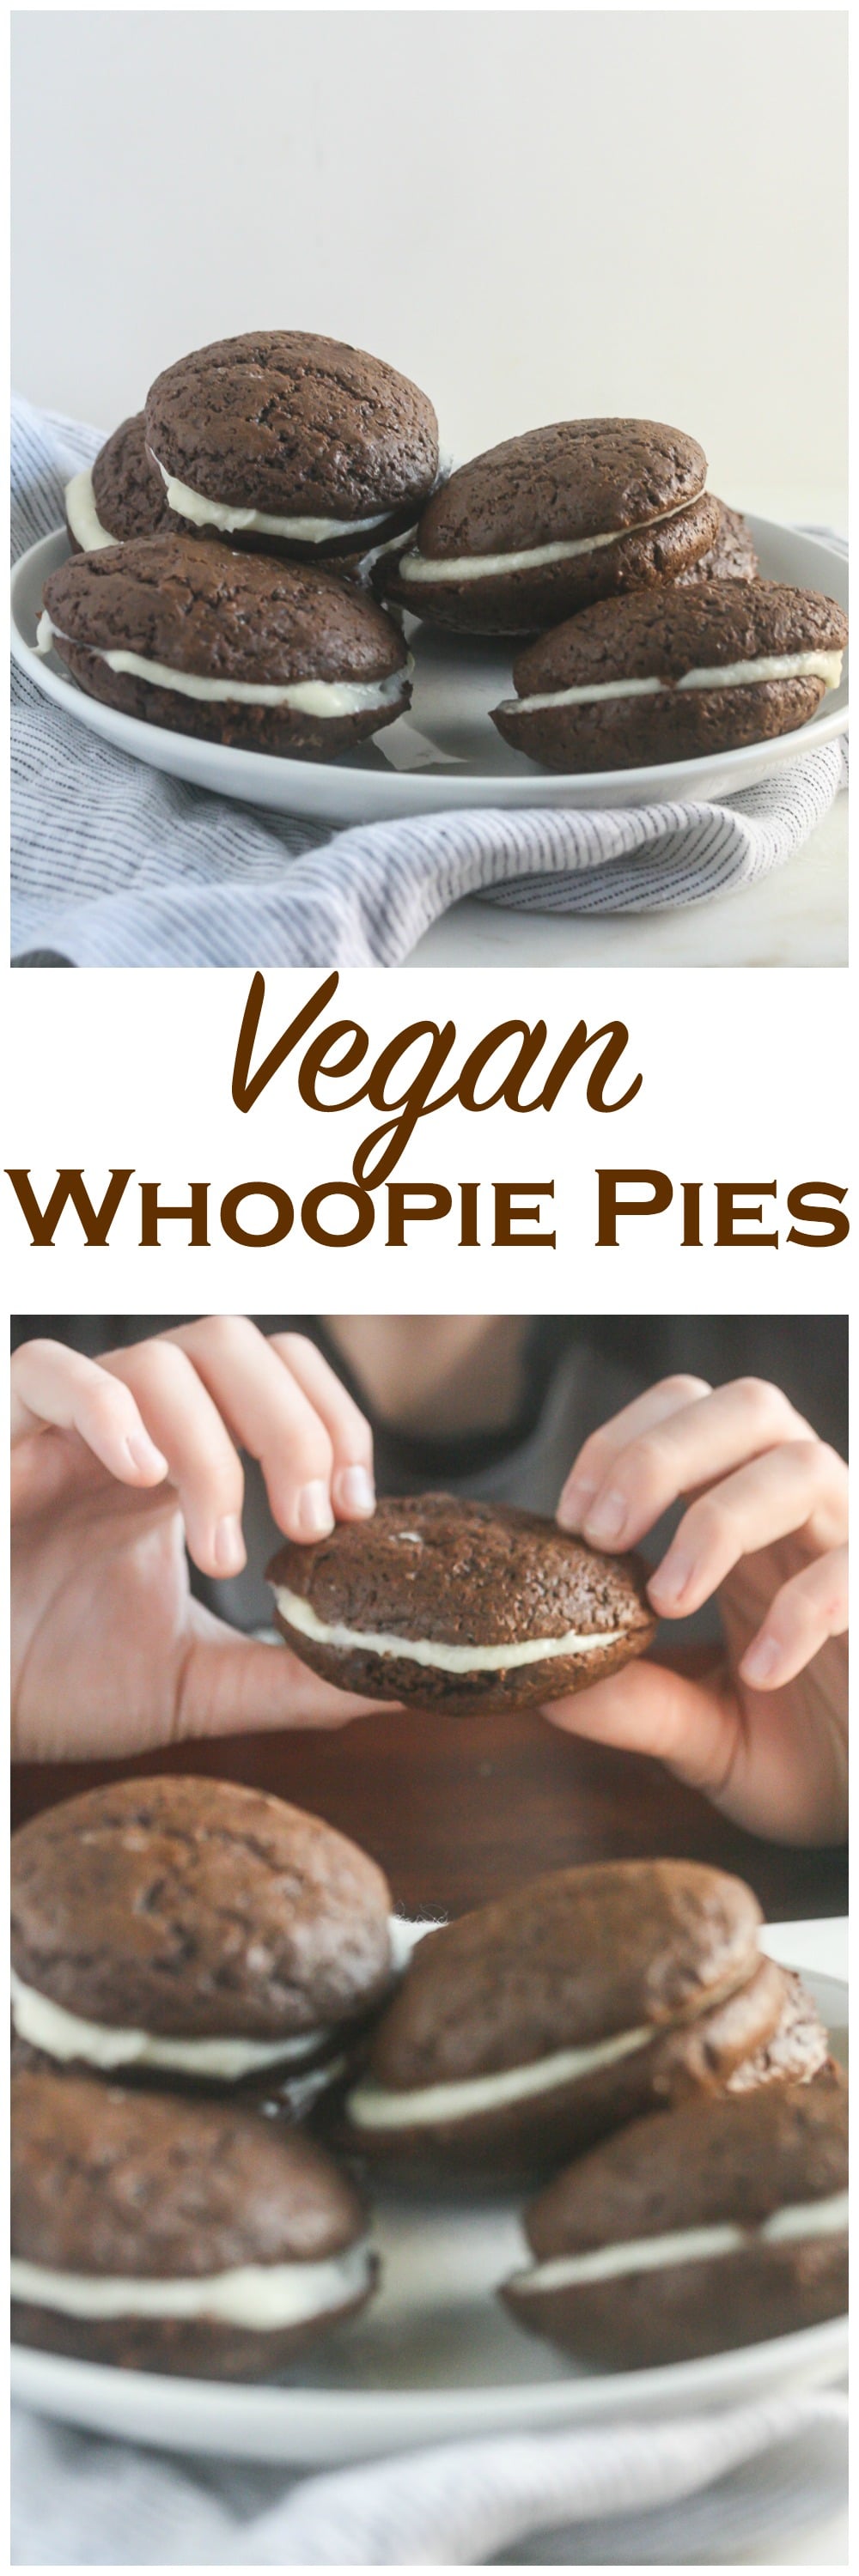 These Vegan Whoopie Pies from Lauren Kelly Nutrition have a cake-like texture and a sweet, whipped filling.